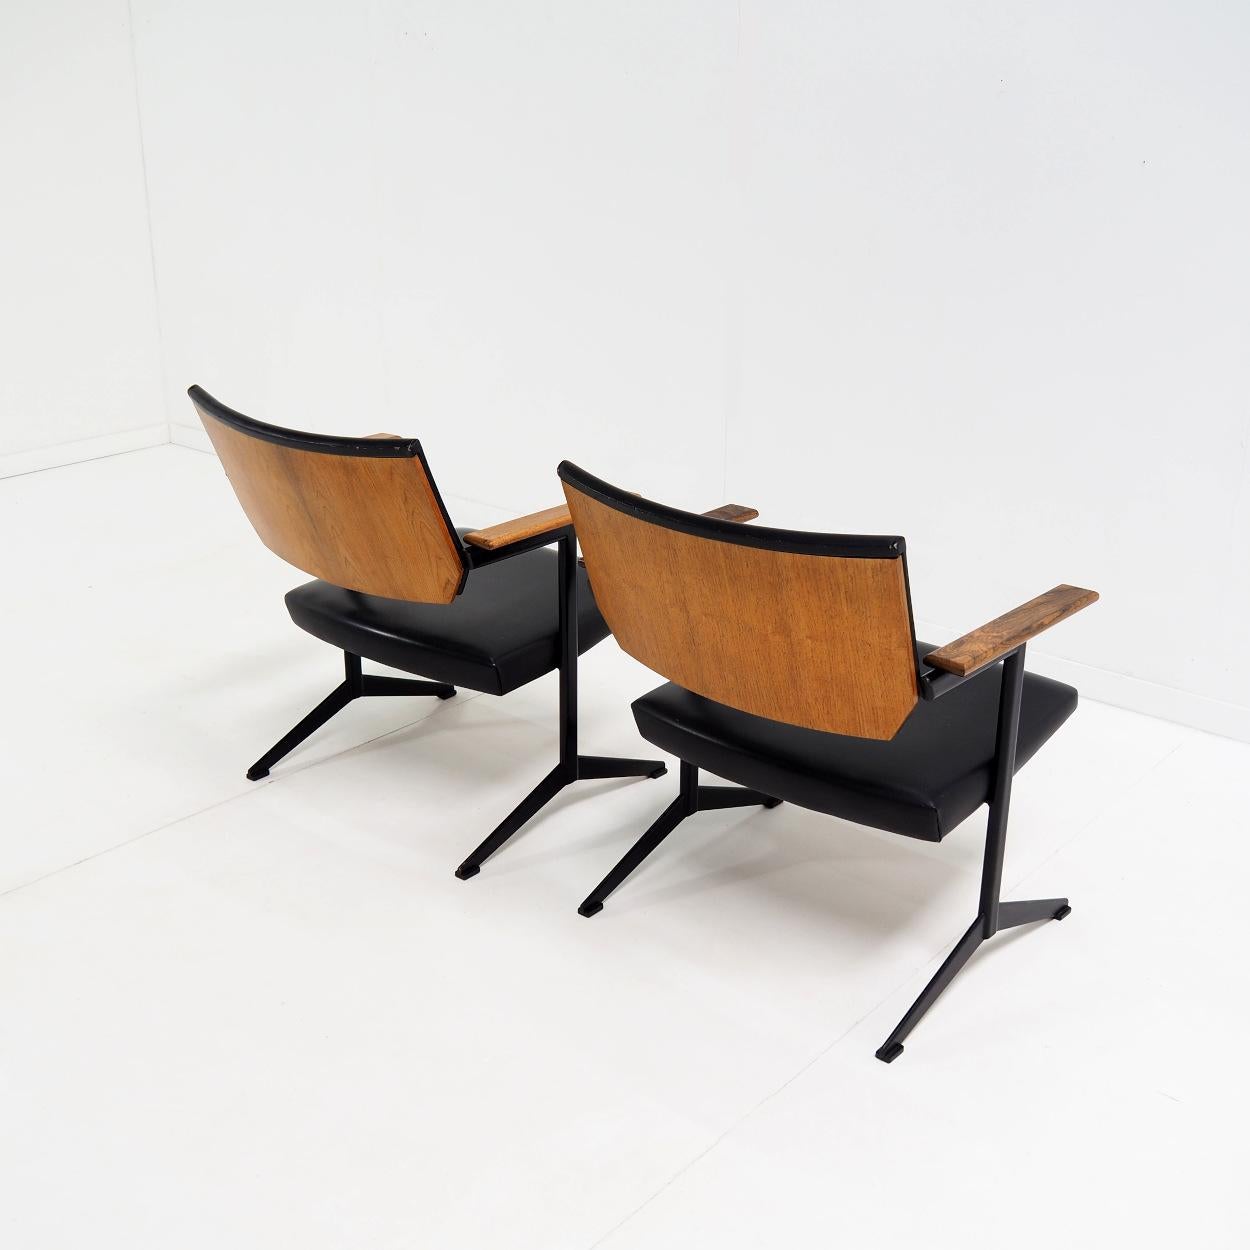 Faux Leather Rare Set of ‘Ariadne’ Fauteuils by Dutch Designer Friso Kramer for Auping For Sale